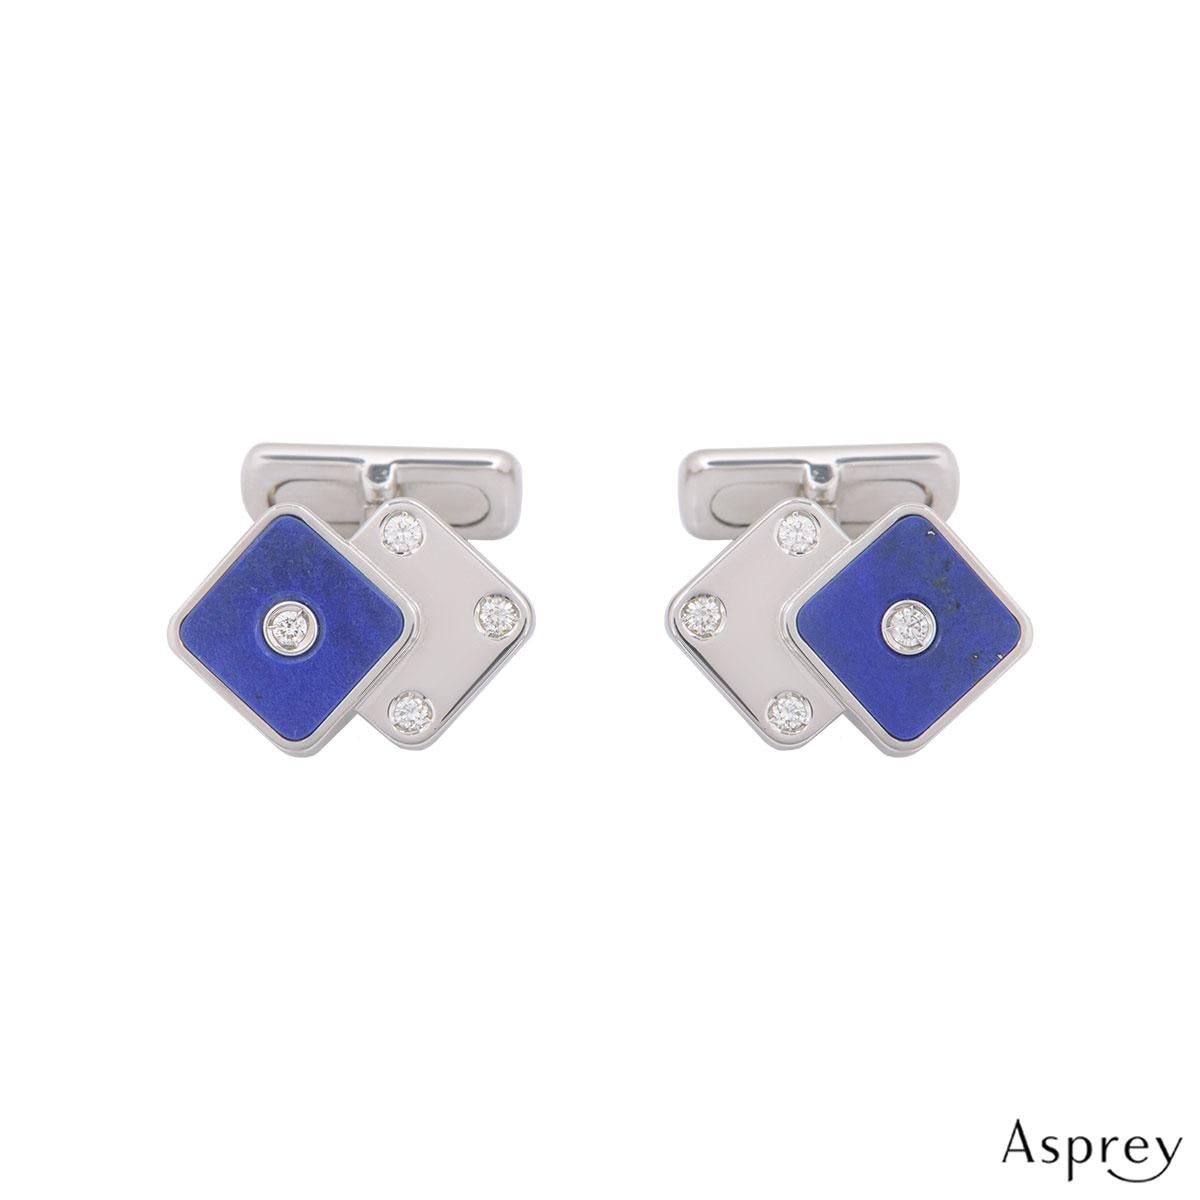 An 18k white gold pair of diamond and lapis cufflinks by Asprey. The cufflinks are in a design of two dice both set with round brilliant cut diamonds one with a lapis lazuli backing. The round brilliant cut diamonds have an approximate weight of